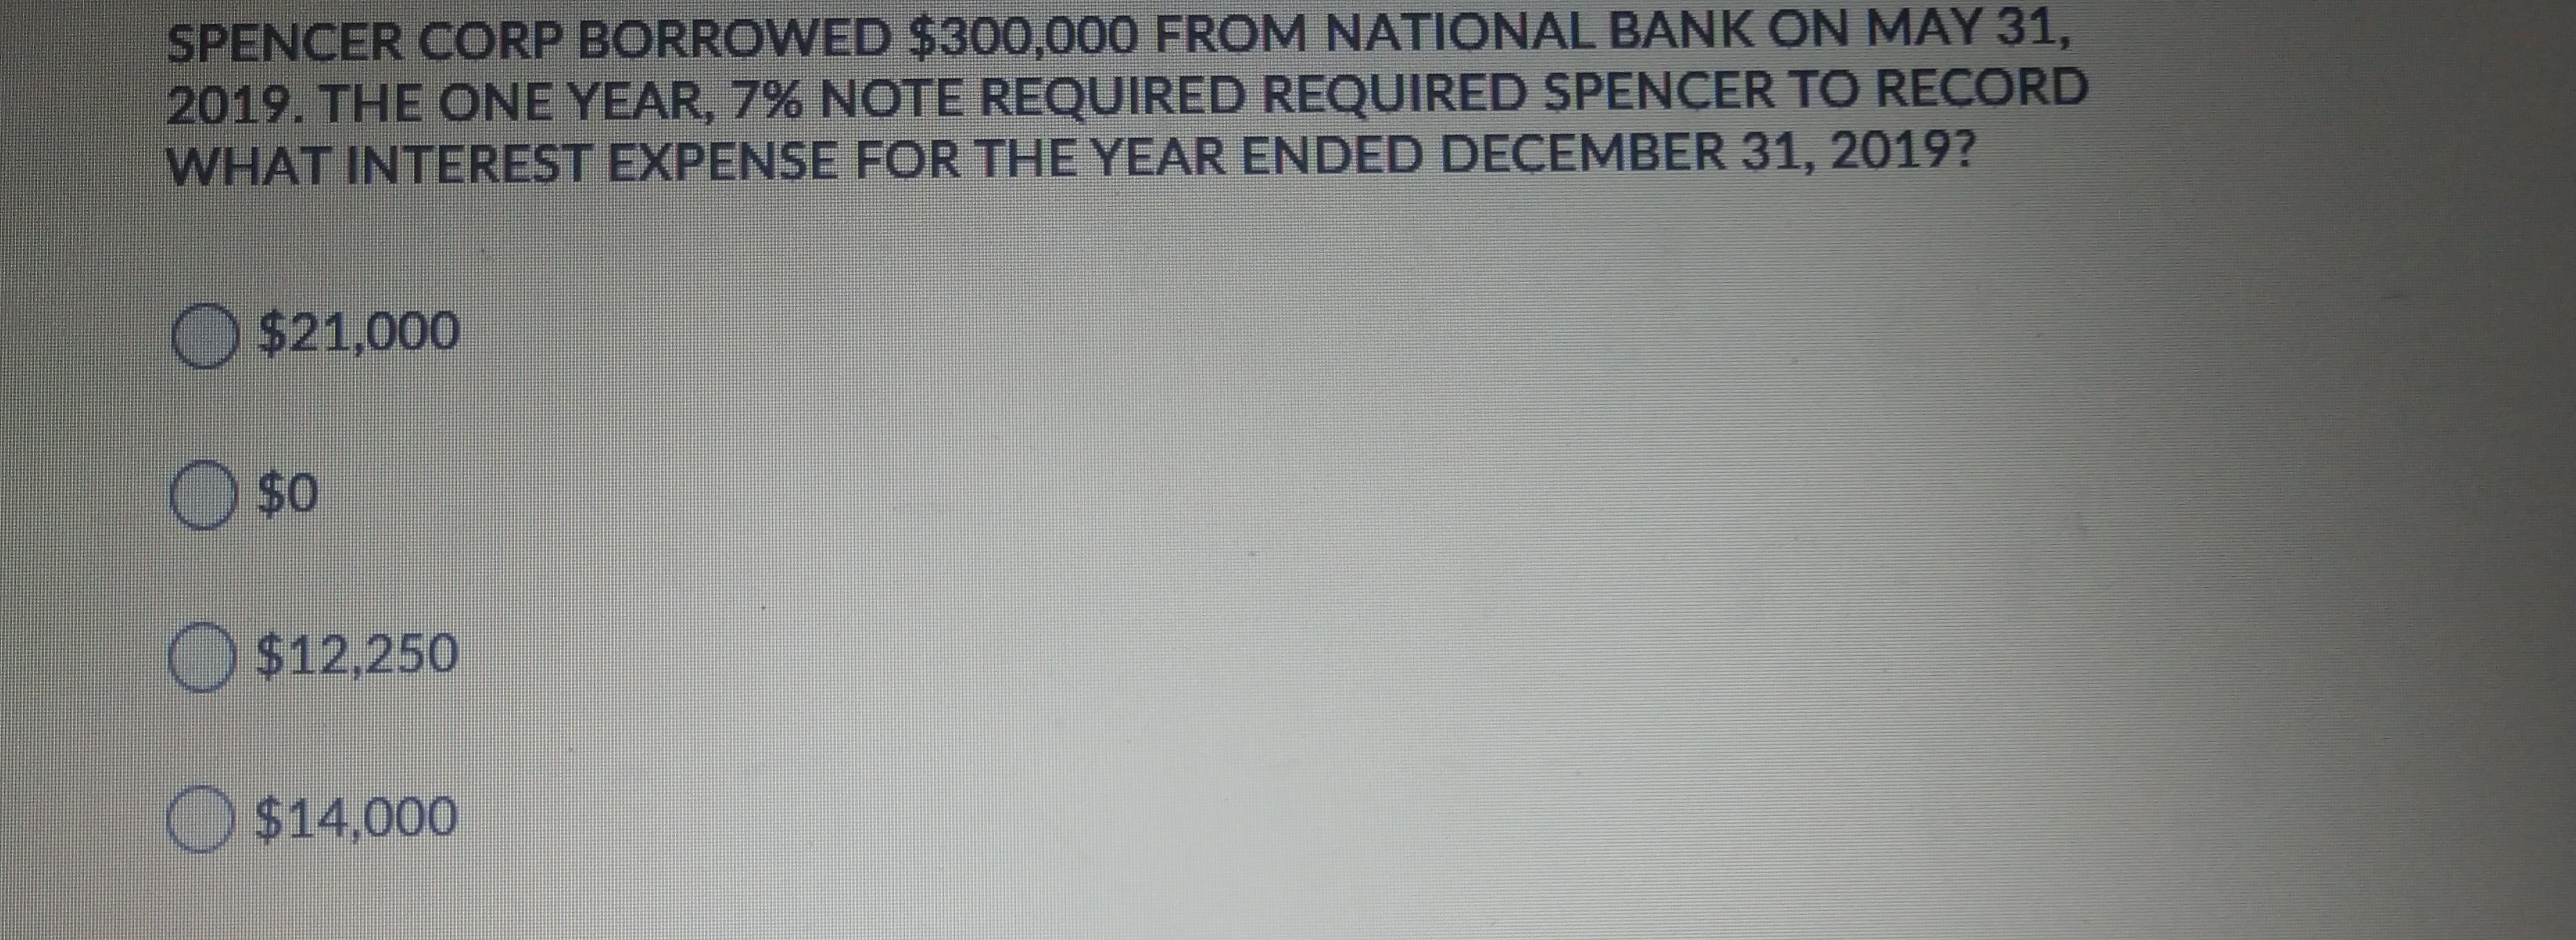 SPENCER CORP BORROWED $300,000 FROM NATIONAL BANK ON MAY 31,
2019. THE ONE YEAR, 7% NOTE REQUIRED REQUIRED SPENCER TO RECORD
WHAT INTEREST EXPENSE FOR THE YEAR ENDED DECEMBER 31, 2019?
O $21,000
O $0
O$12,250
O $14,000
